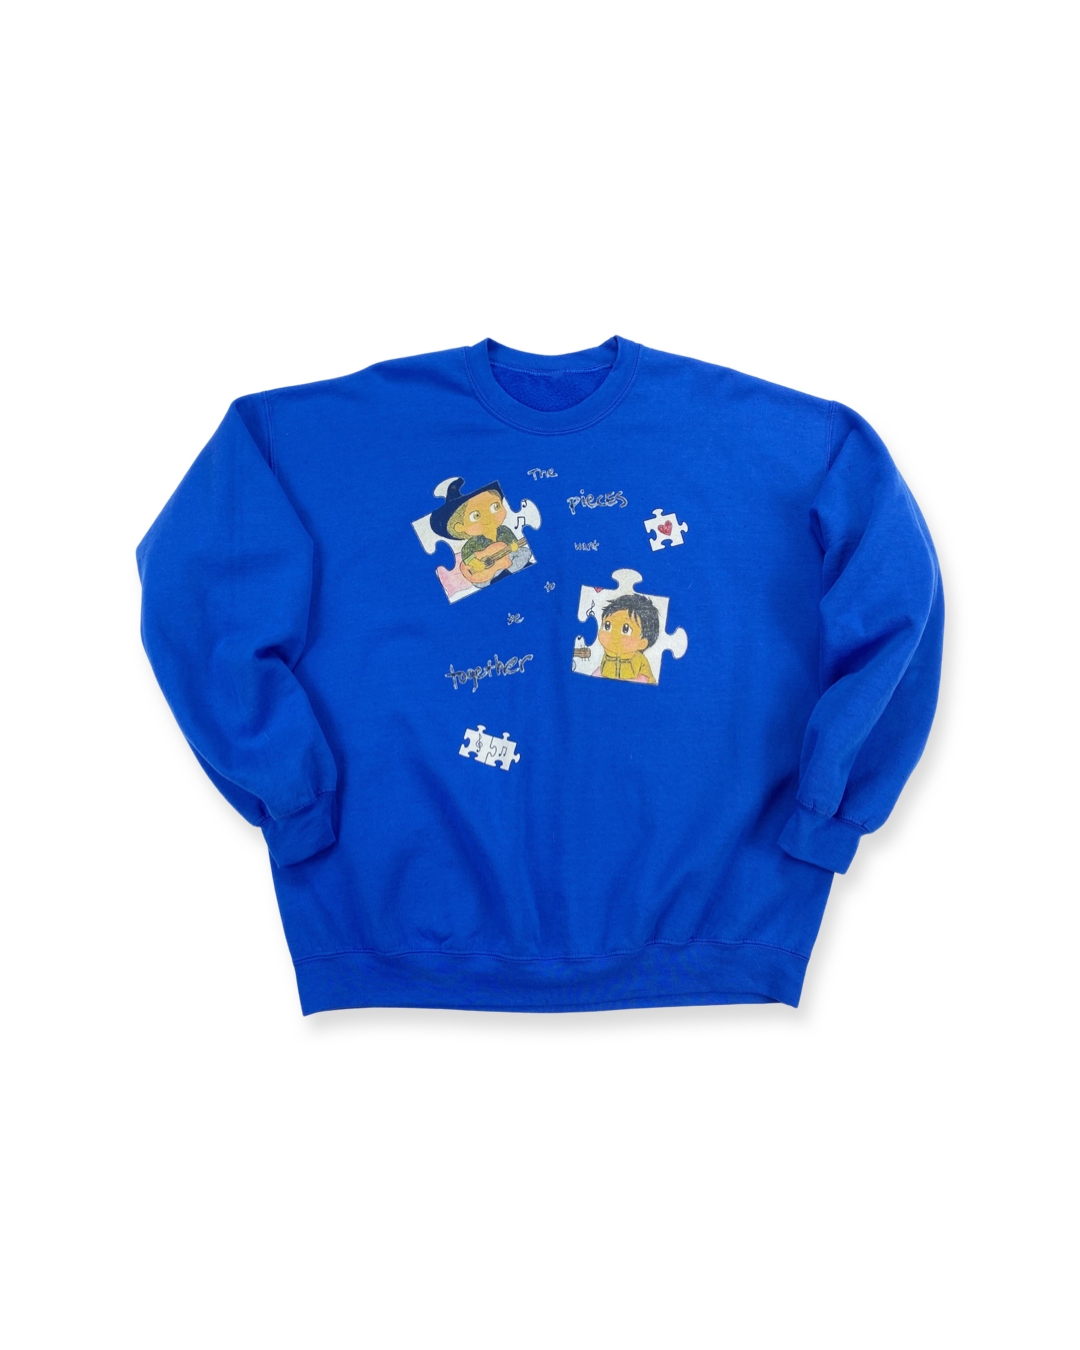 PIECES WANT TO BE TOGETHER CREWNECK BLUE